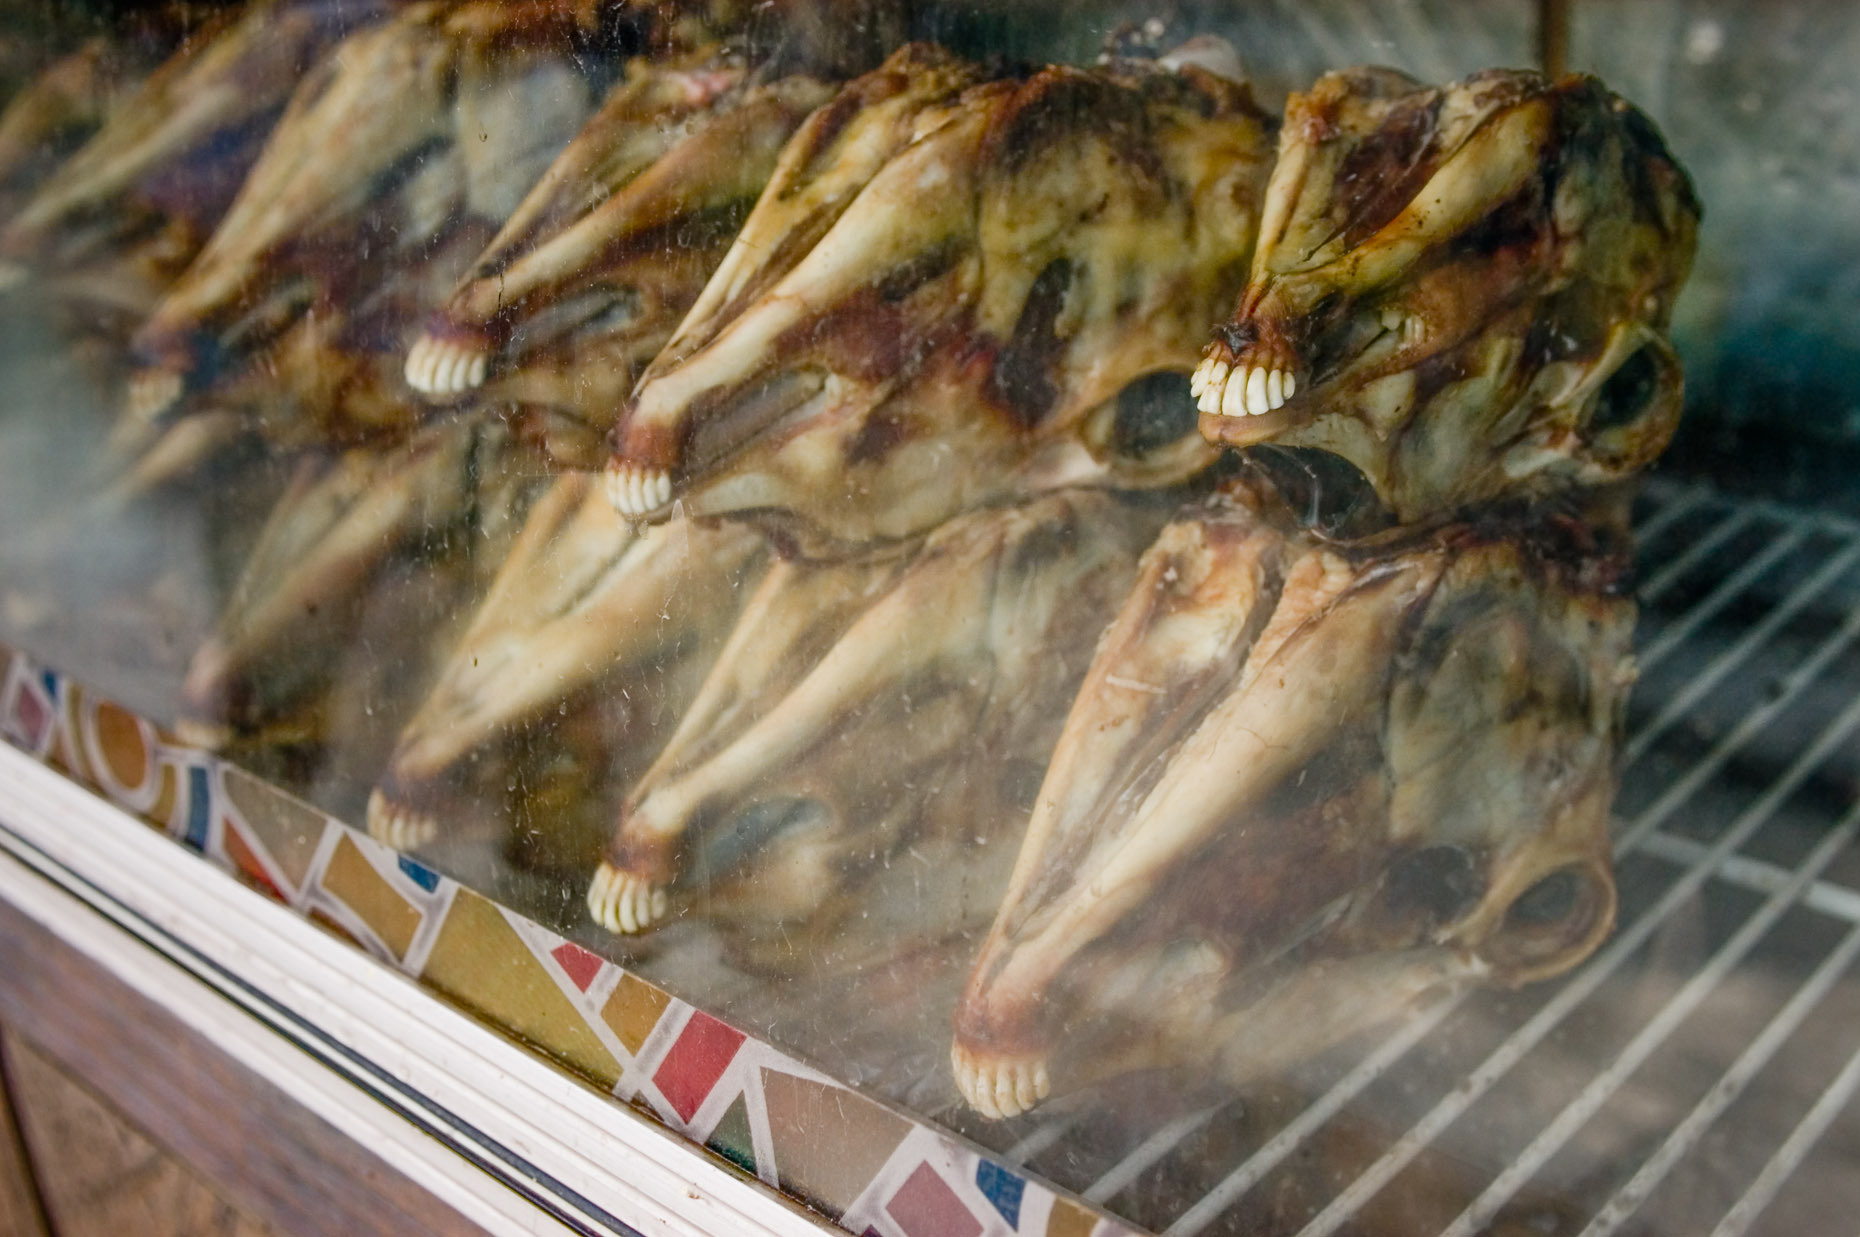 Image of barbequed sheeps heads in display case, Istanbul Turkey.